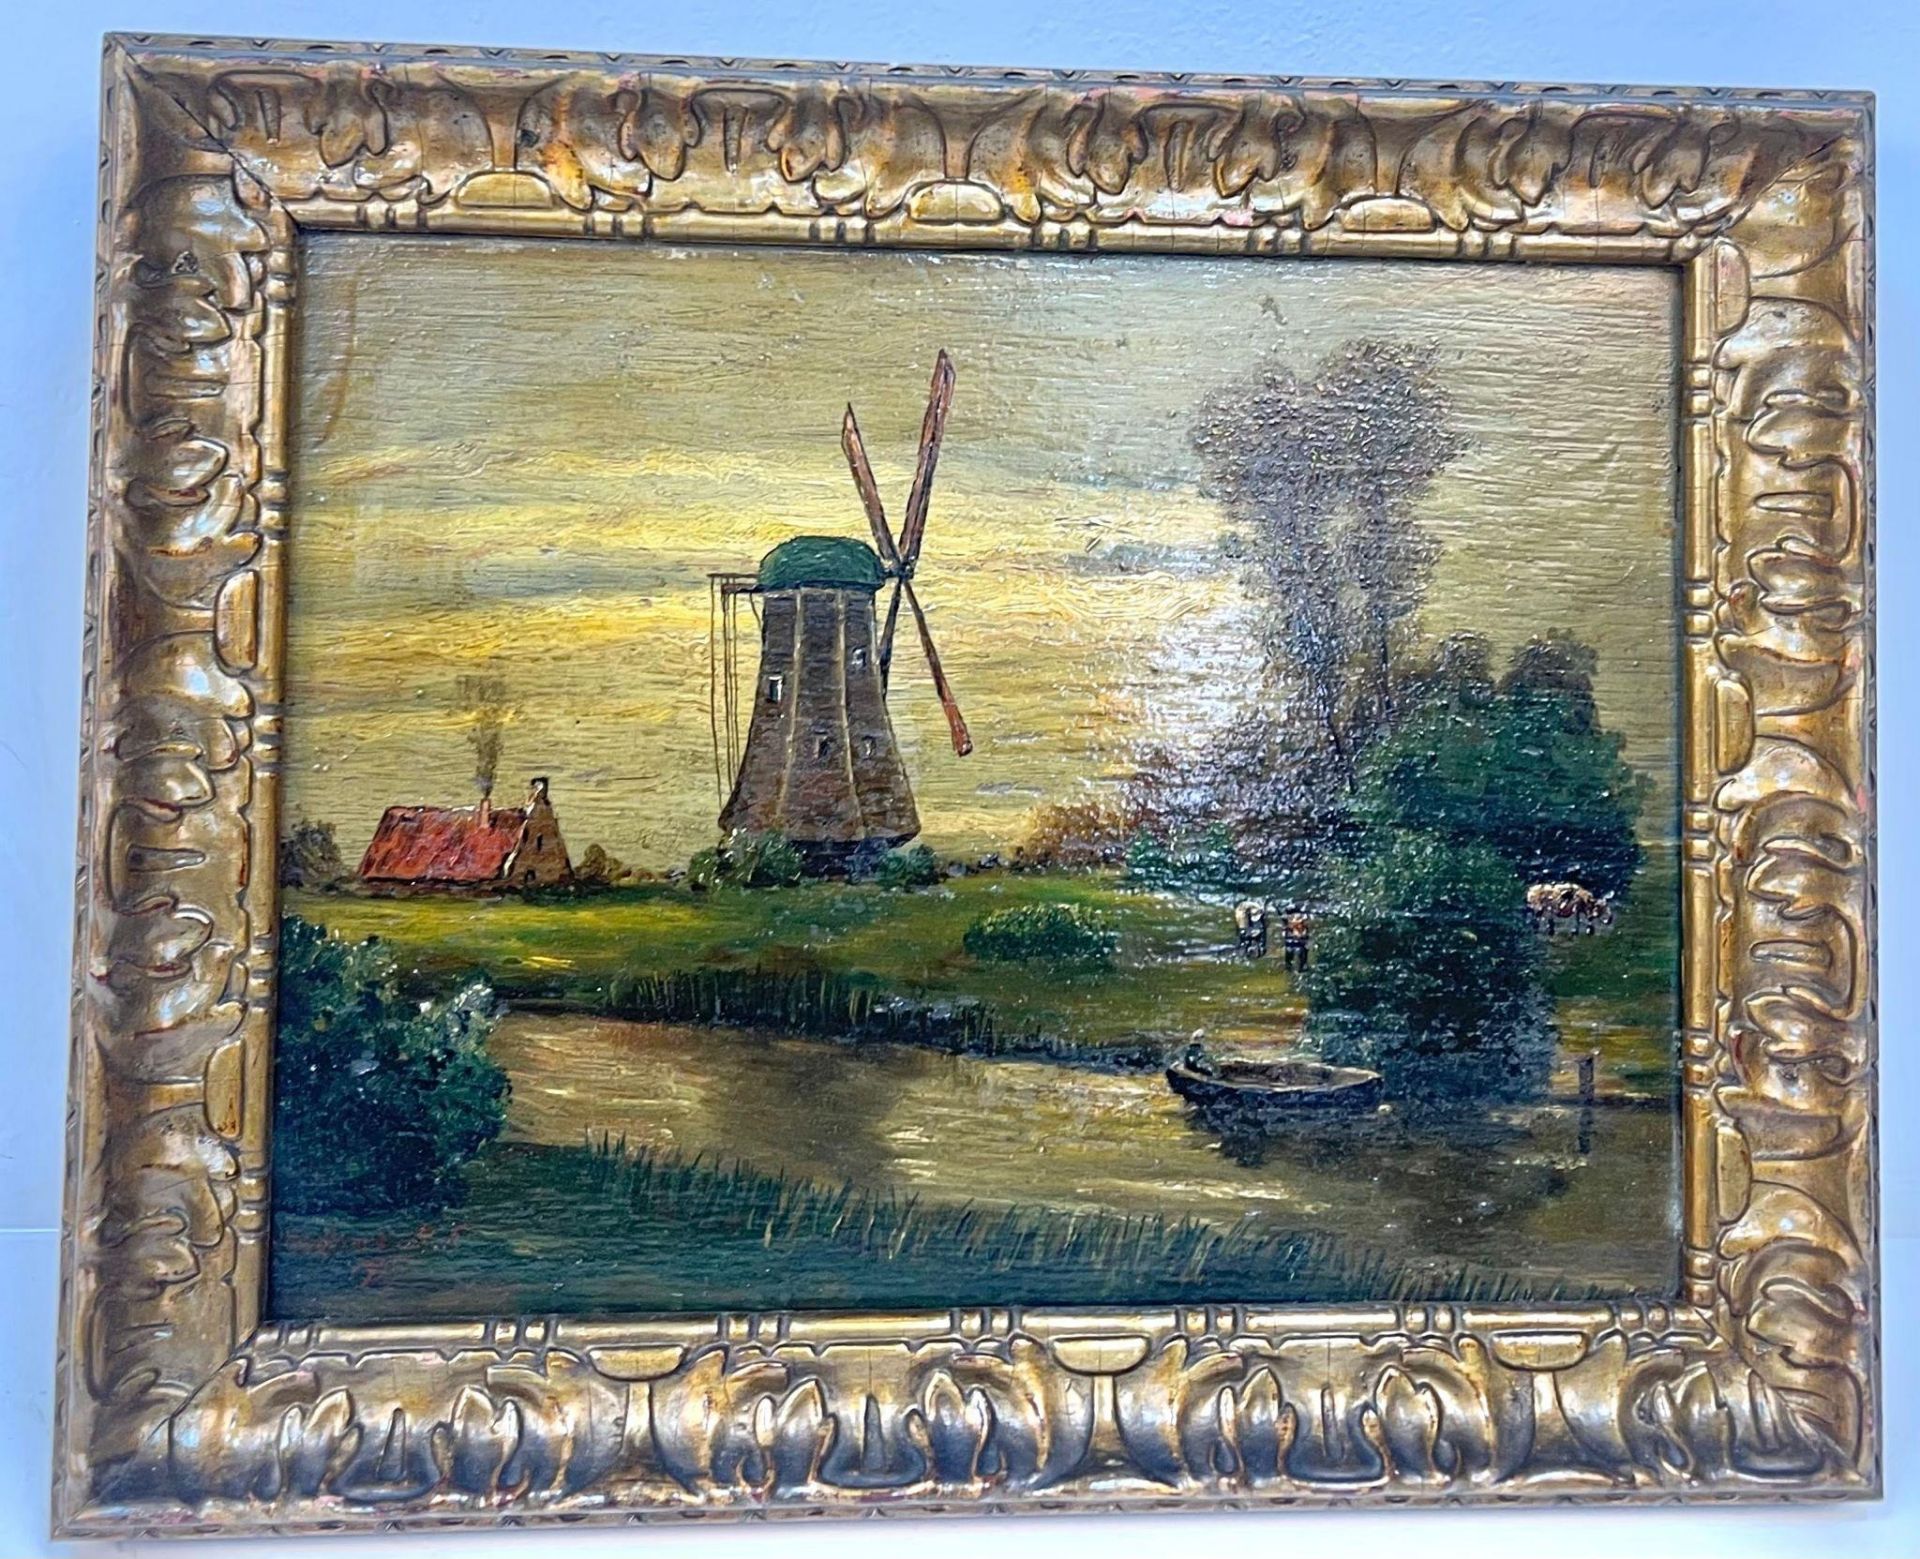 Two Antique Oil on Board Landscape Paintings of Dutch Windmills and Farmland. In gilded frames - - Image 4 of 6